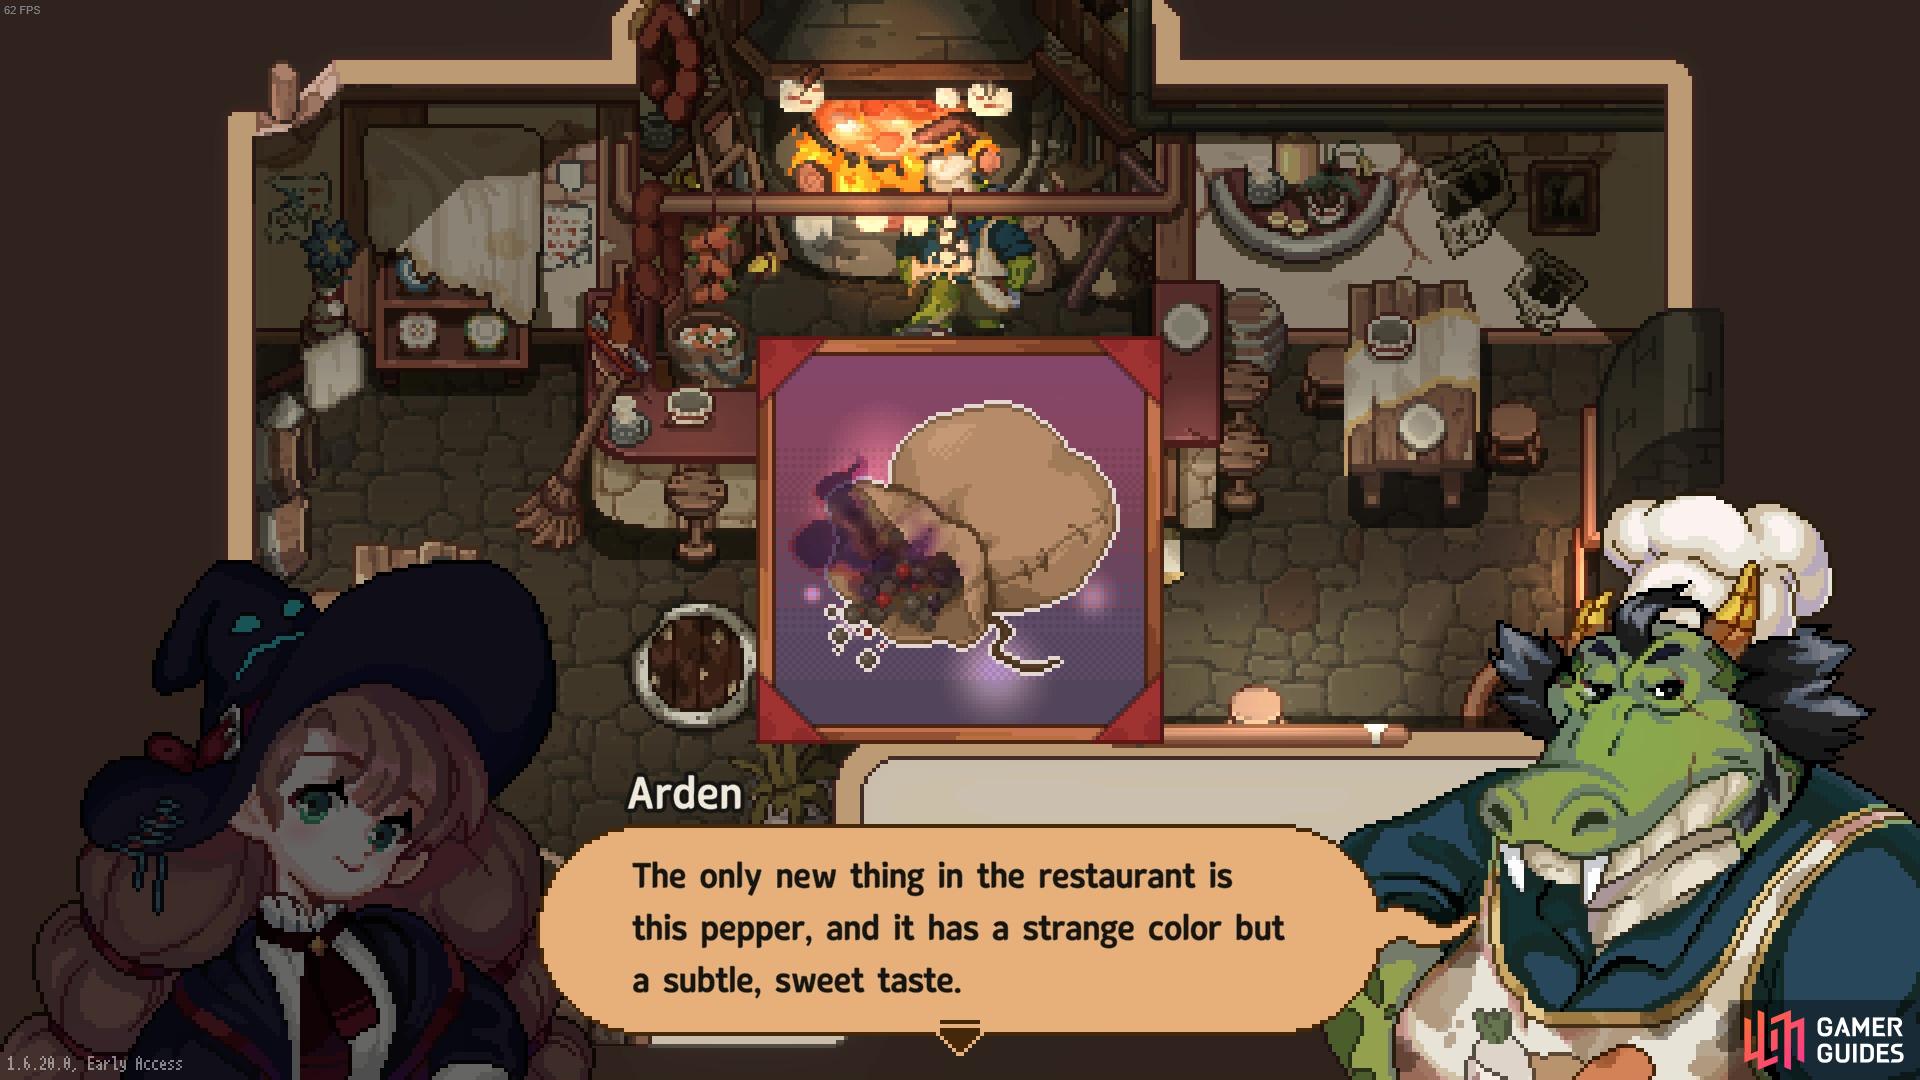 Arden will ask you to investigate his new pepper bag that's giving him nightmares